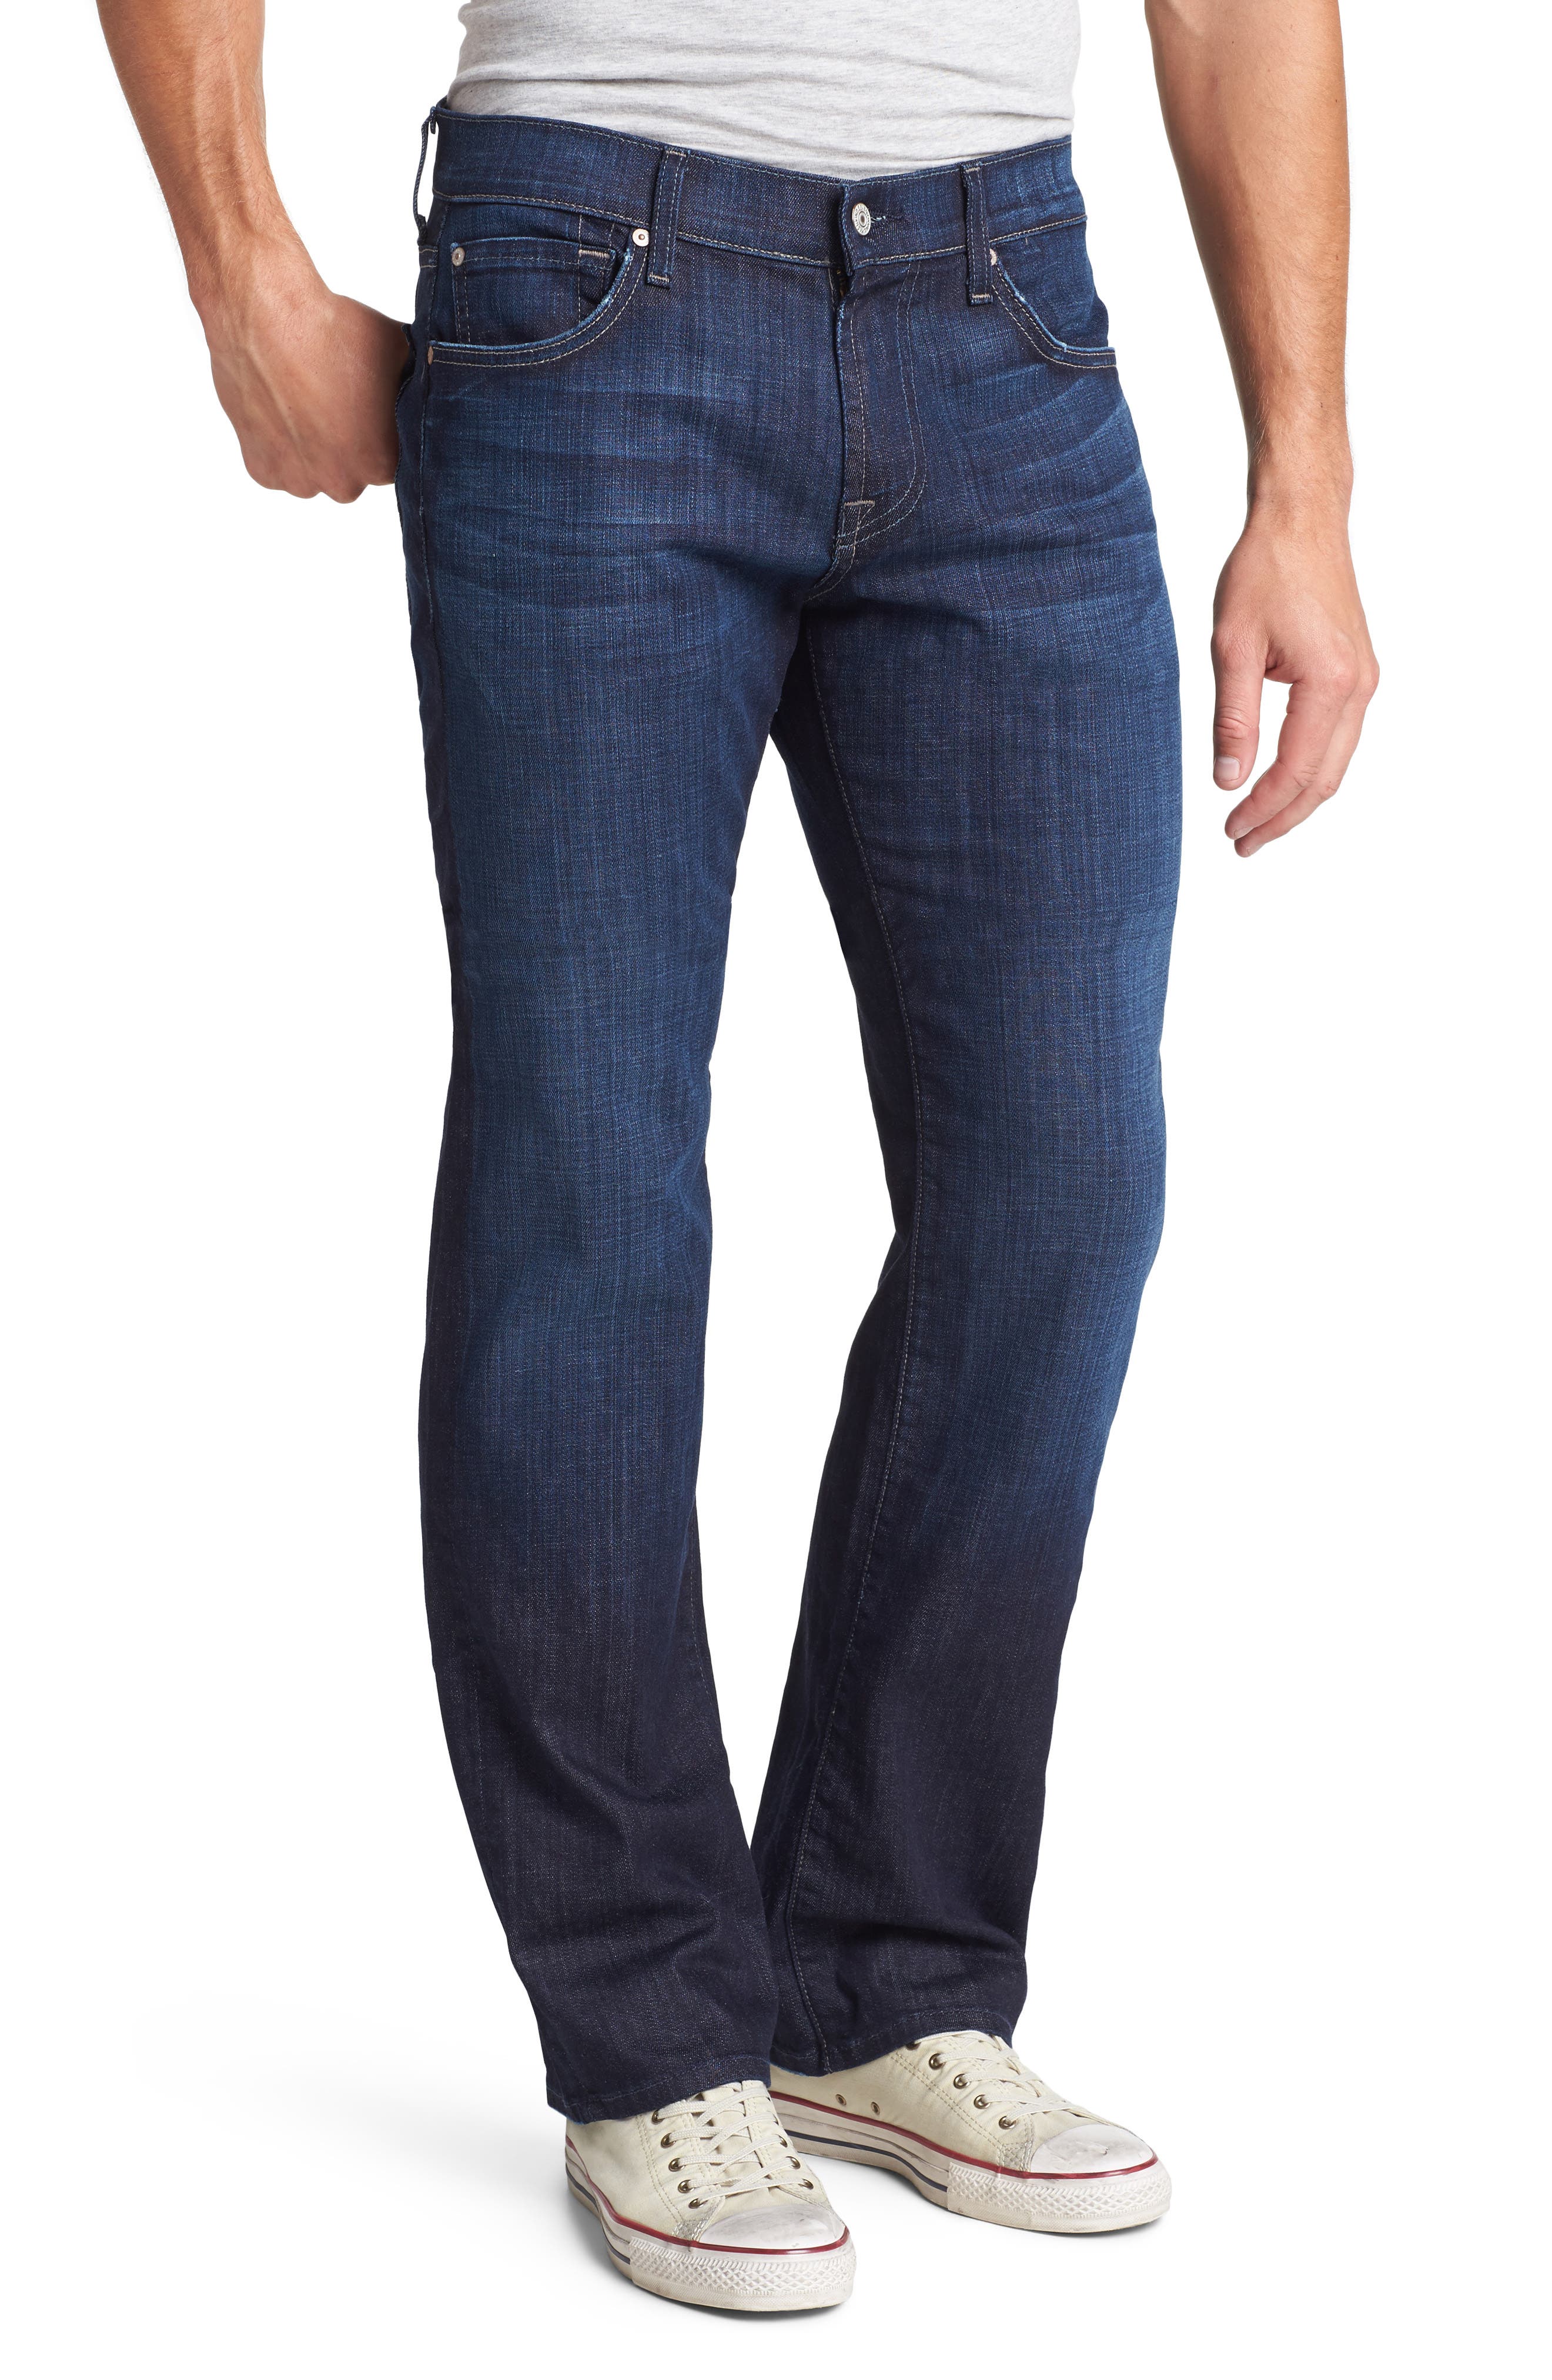 Retail $198 NWT Men's 7 For All ManKind Slimmy Slim Straight Leg Jeans